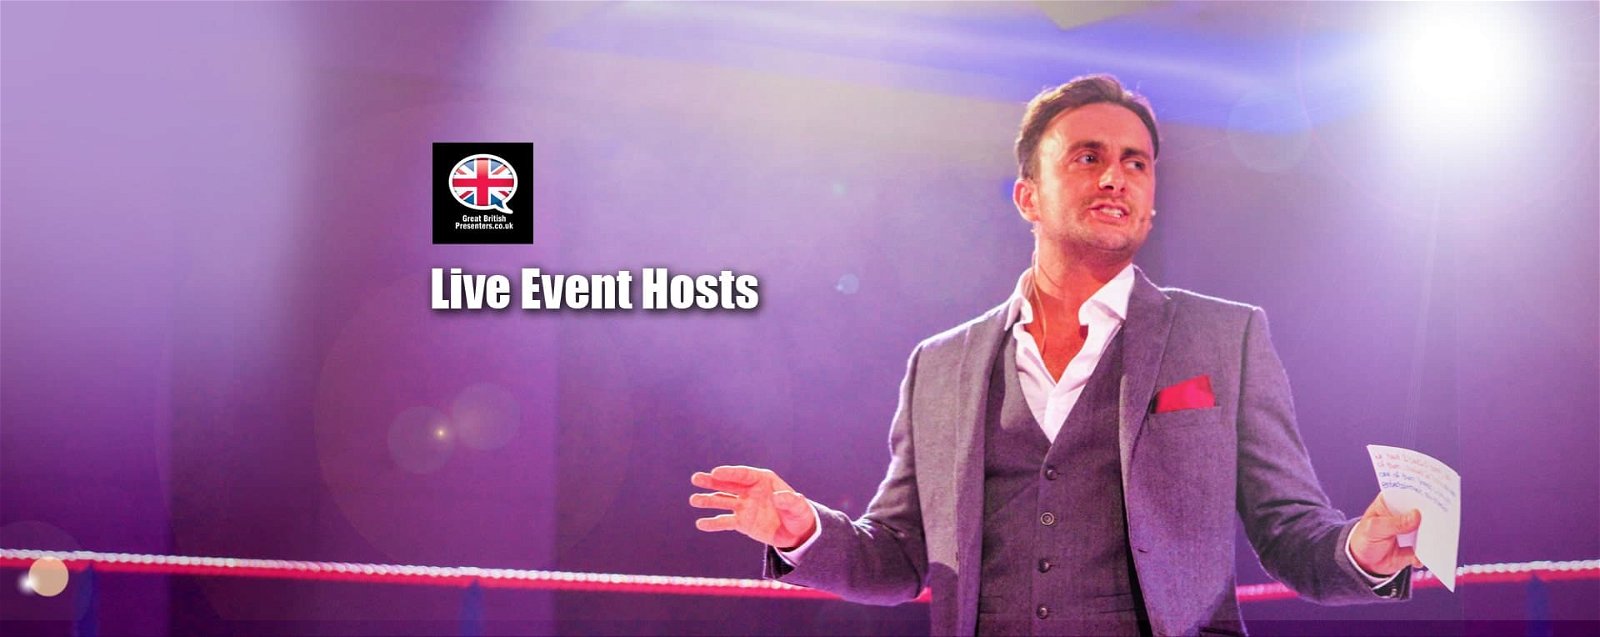 Corporate Live special Event Hosts party entertainers at Great British Presenters-min